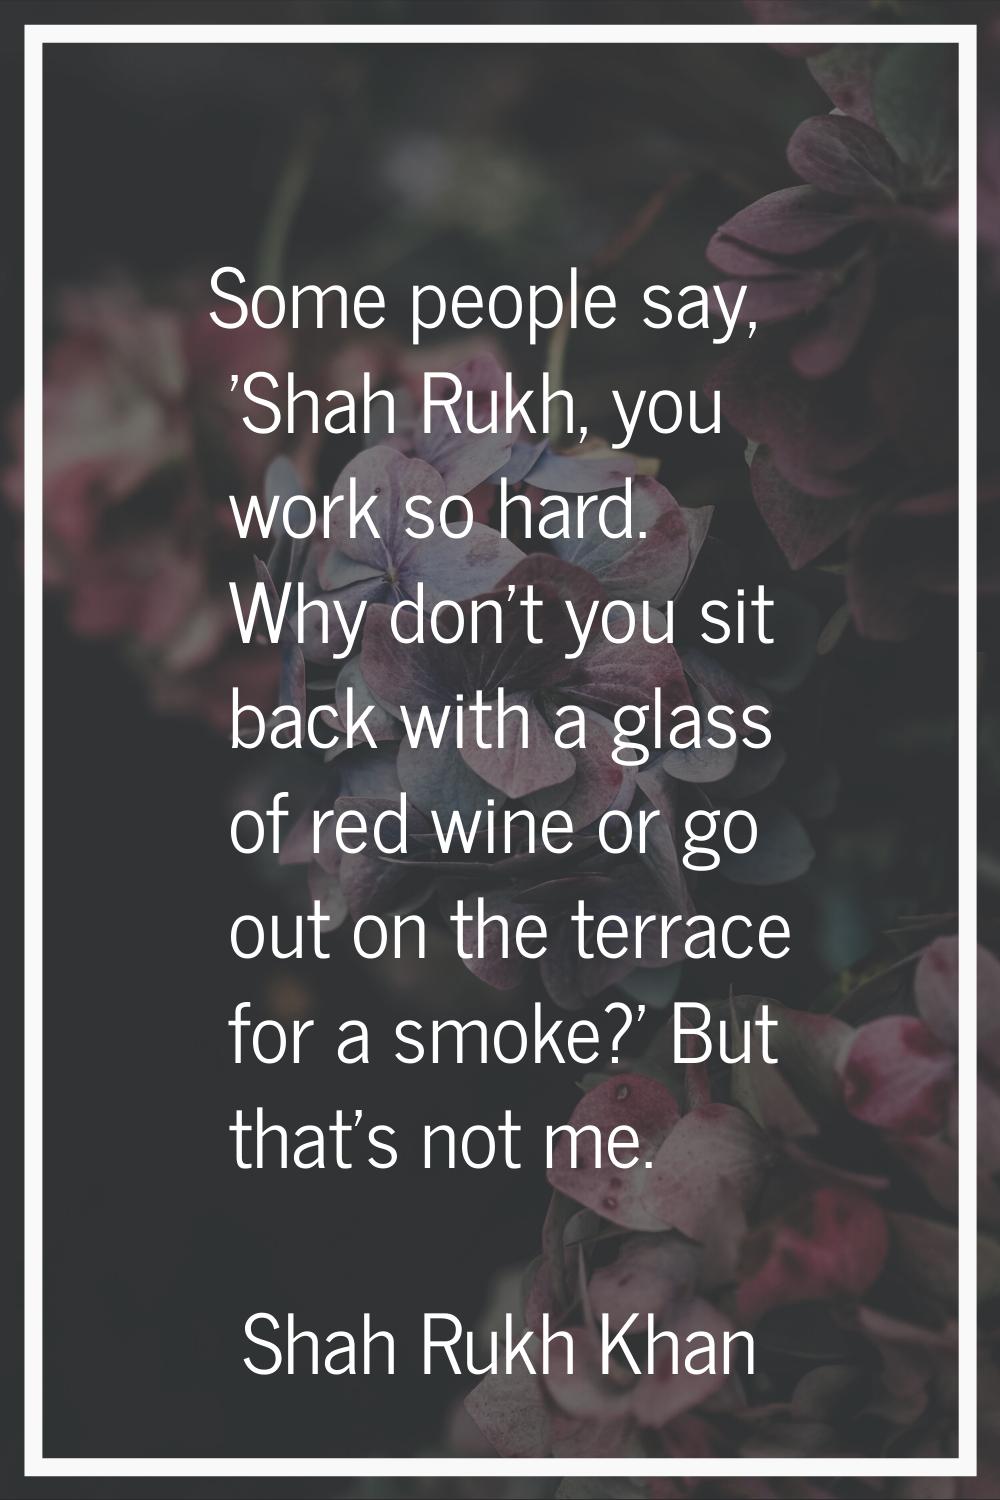 Some people say, 'Shah Rukh, you work so hard. Why don't you sit back with a glass of red wine or g